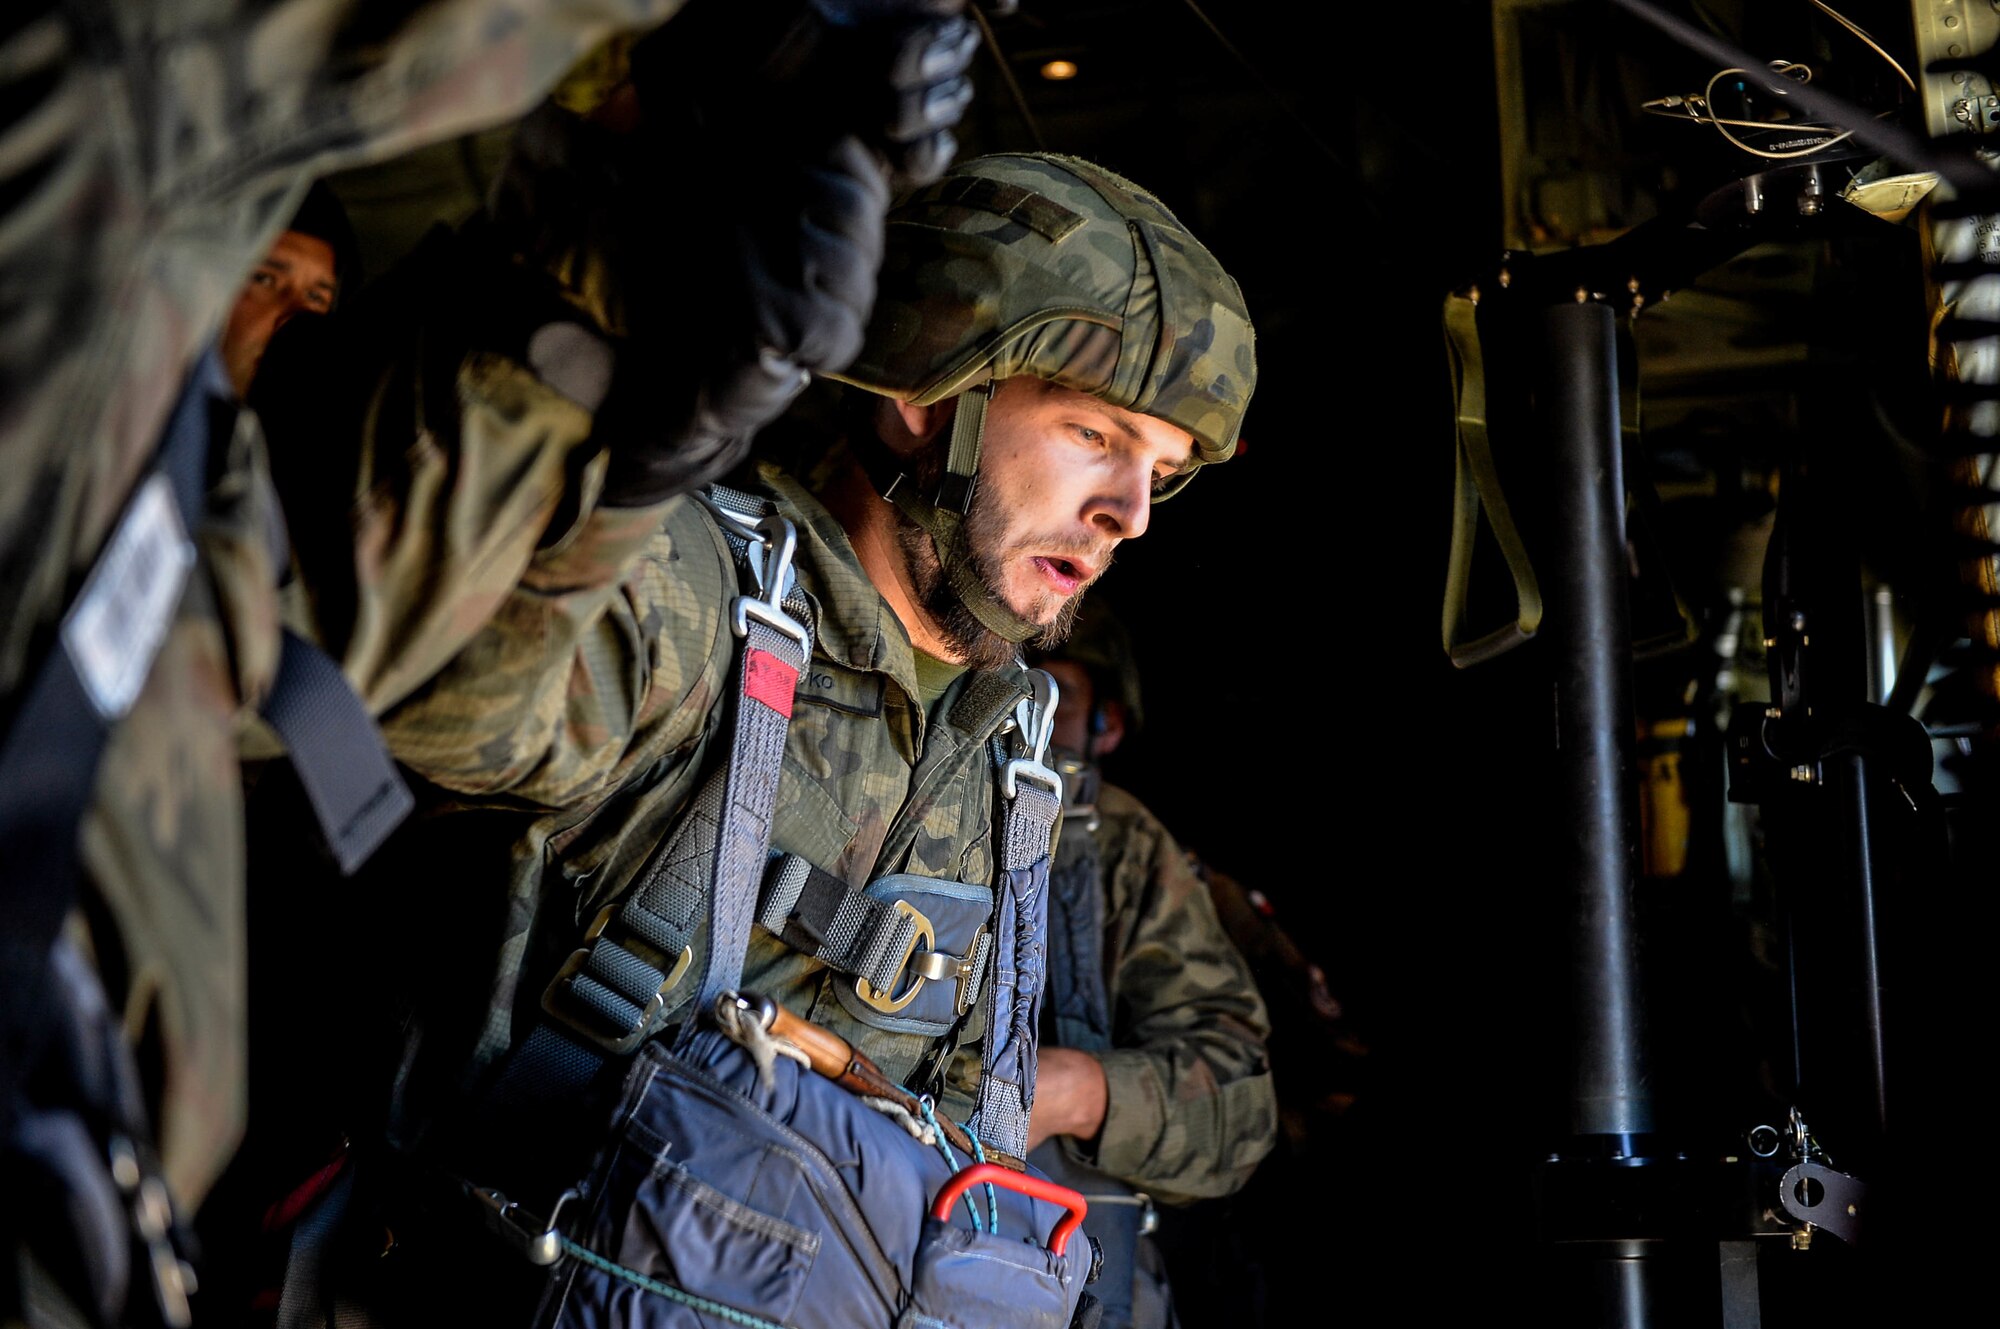 A Polish military paratrooper looks down over Poland as he prepares to jump from a U.S. Air Force C-130J Super Hercules Aug. 7, 2018. Two C-130Js assigned to the 86th Airlift Wing airdropped approximately 100 Polish troops as part of an annual bilateral exercise with the Polish military. (U.S. Air Force photo by Senior Airman Joshua Magbanua)